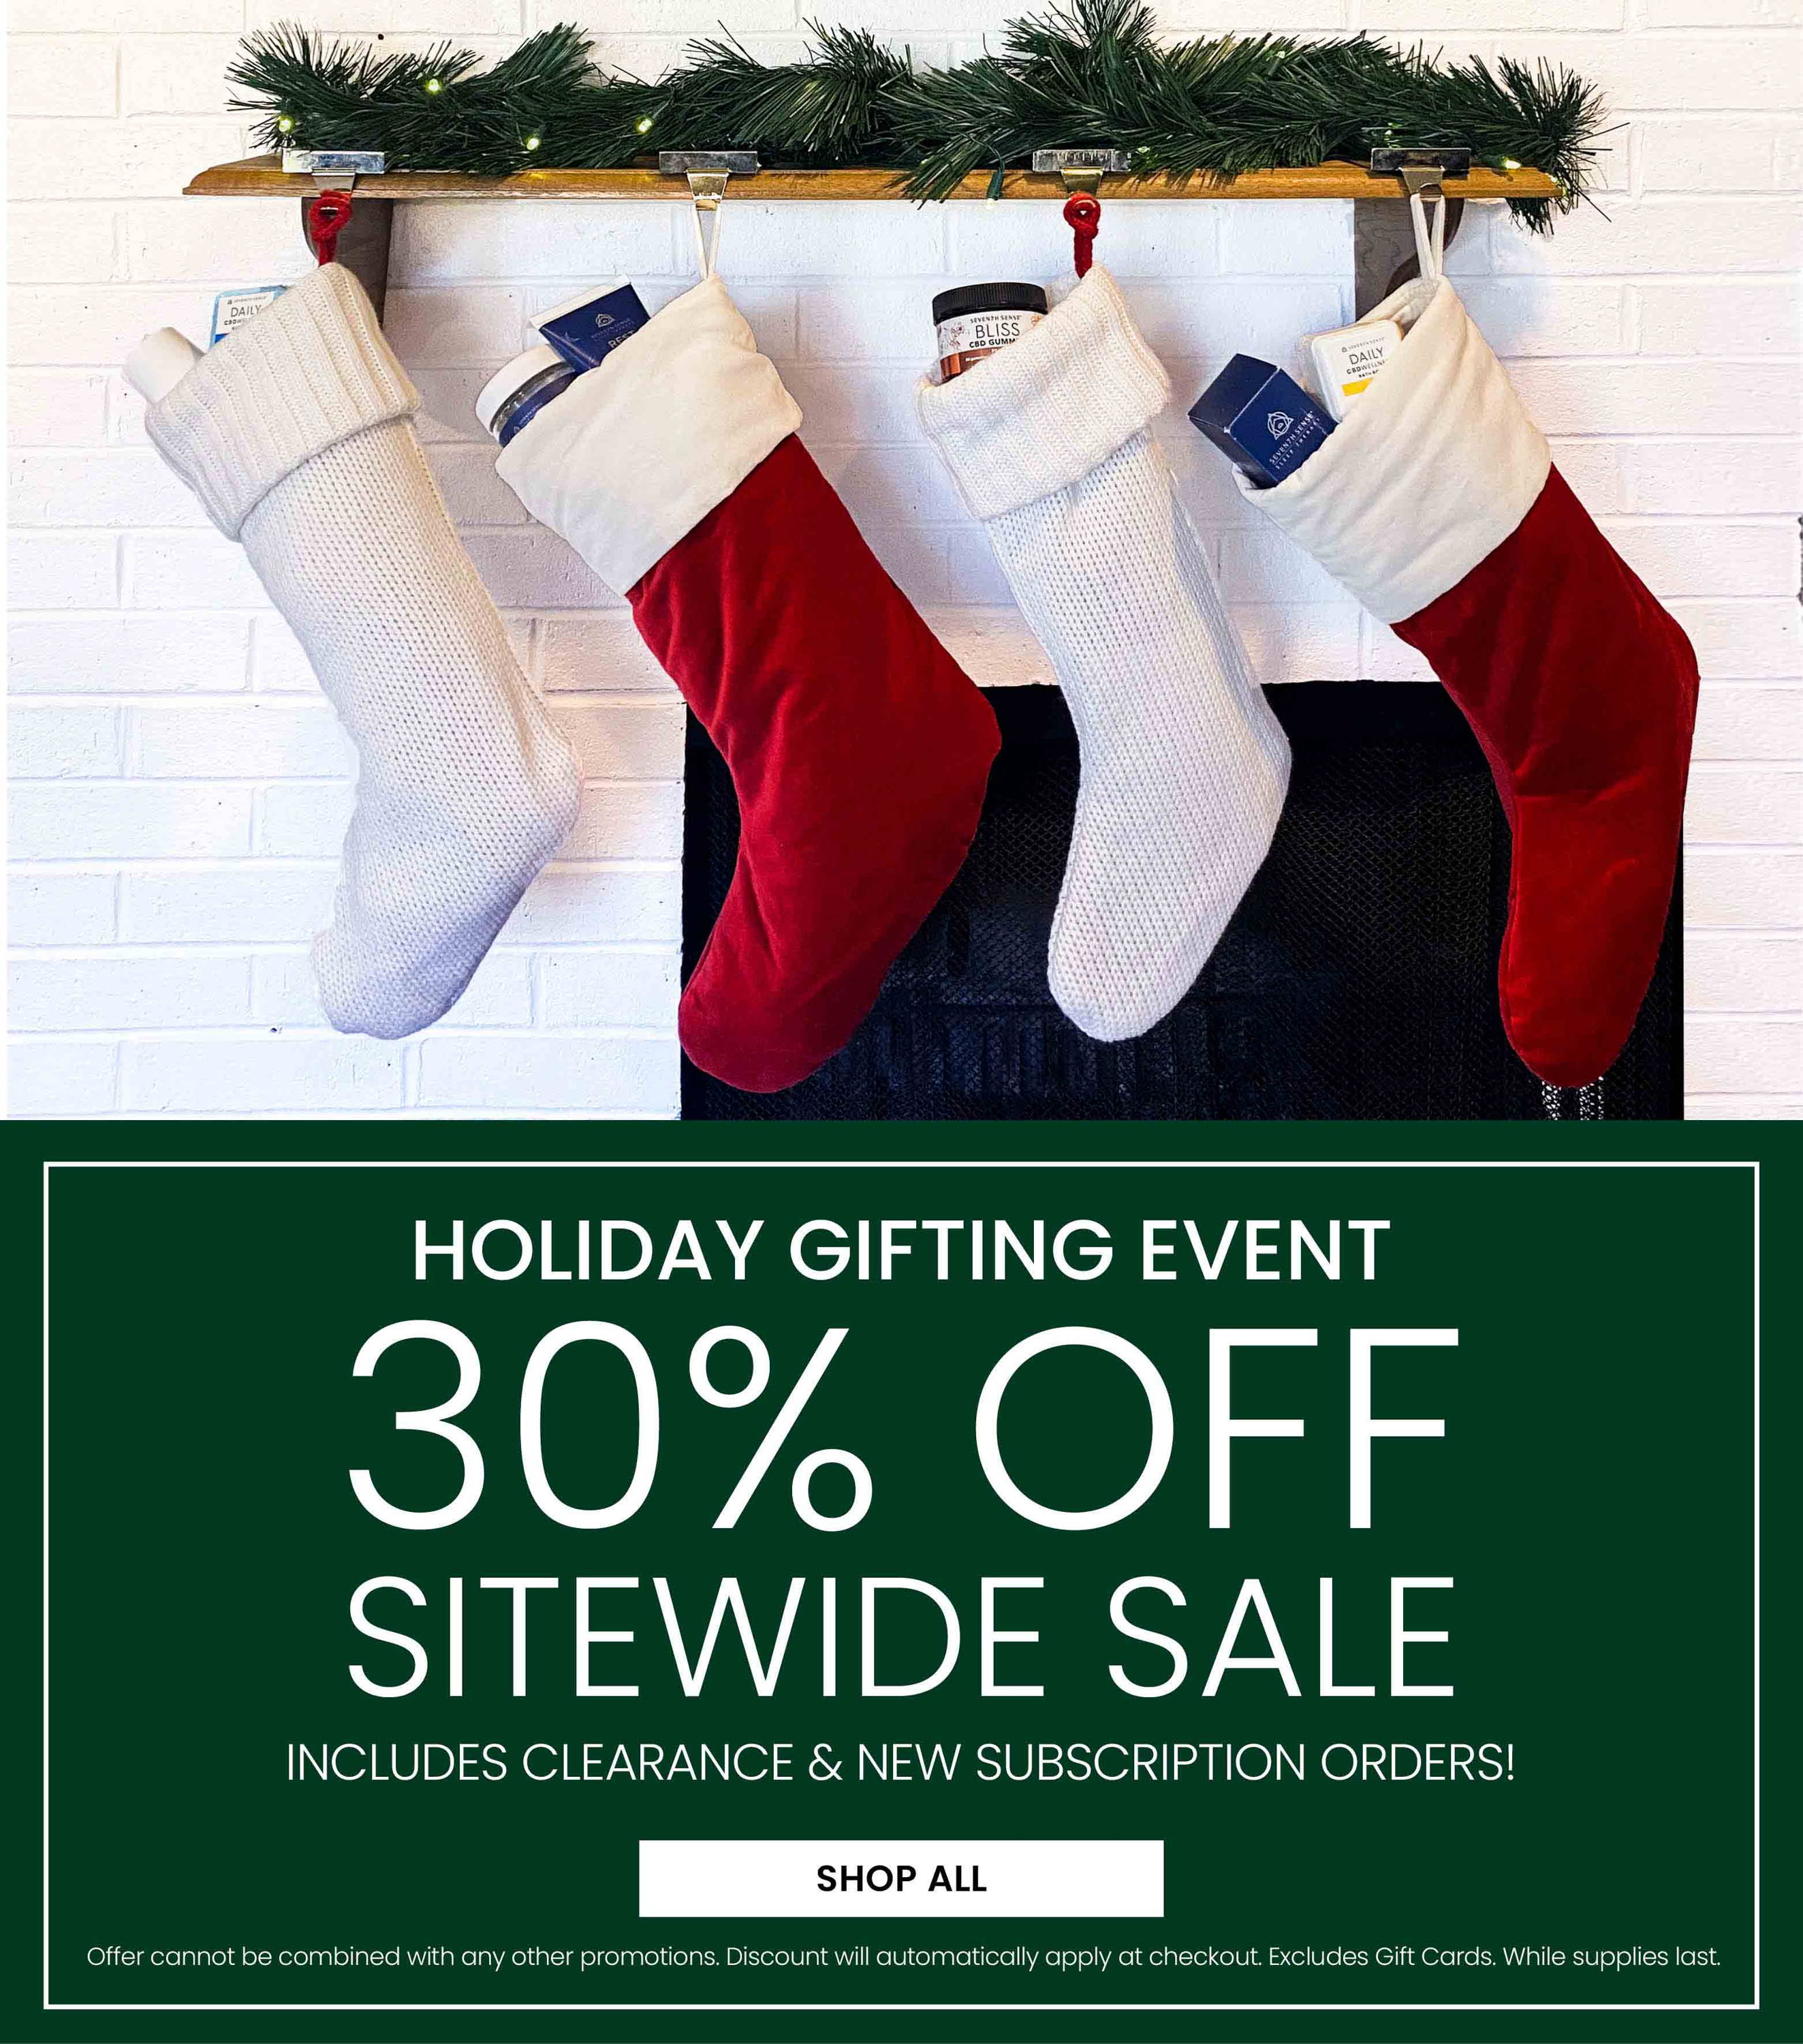 Holiday Gifting Event. 30% Off Sitewide Sale. Includes Clearance & New Subscriptions.